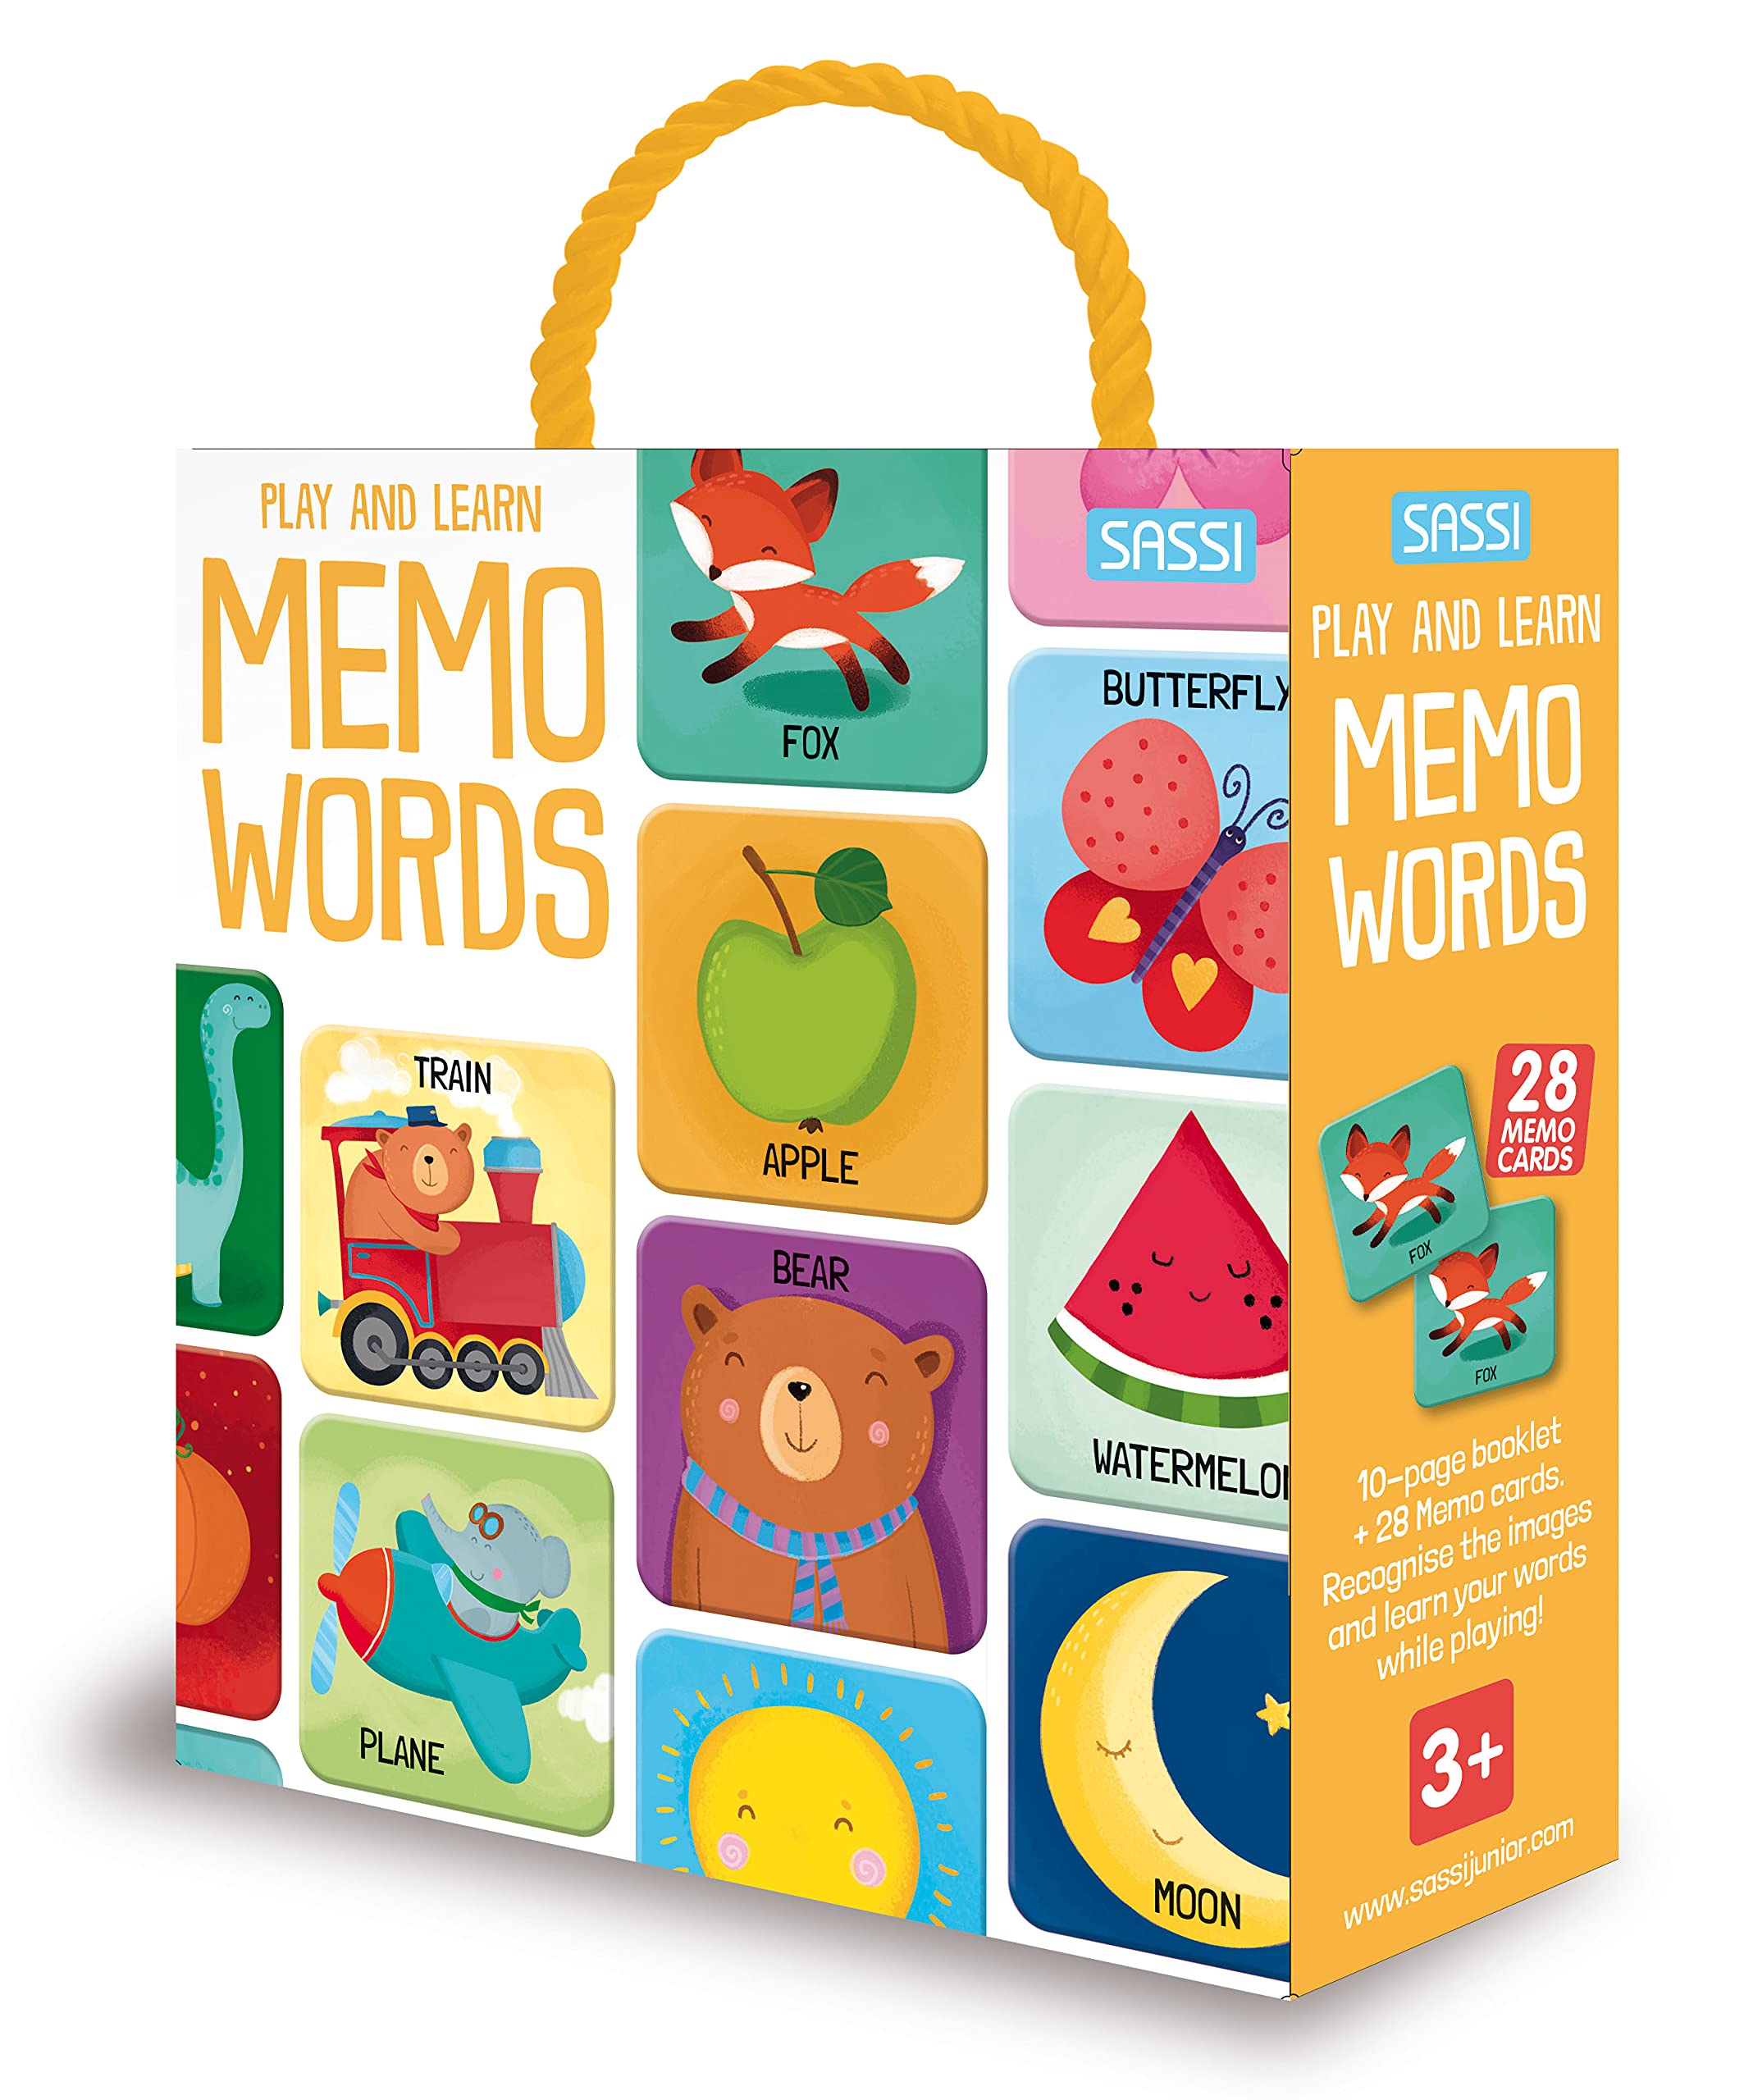 Play and Learn. Word Memo